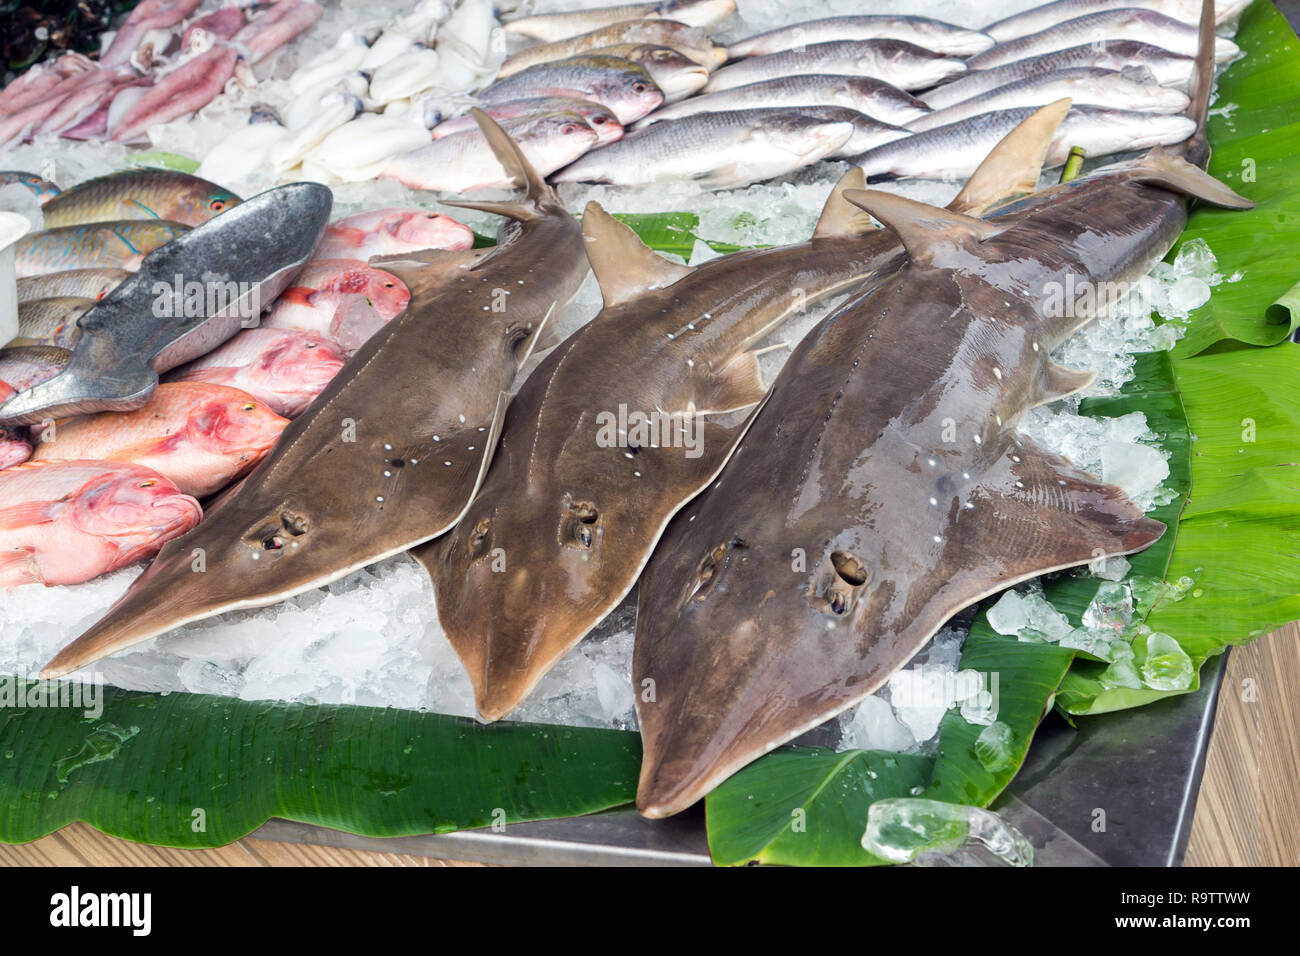 Fresh Seafood Catch, Sharks and Fish on Ice for Sale on Street Outside a Restaurant in Phuket, Thailand Stock Photo